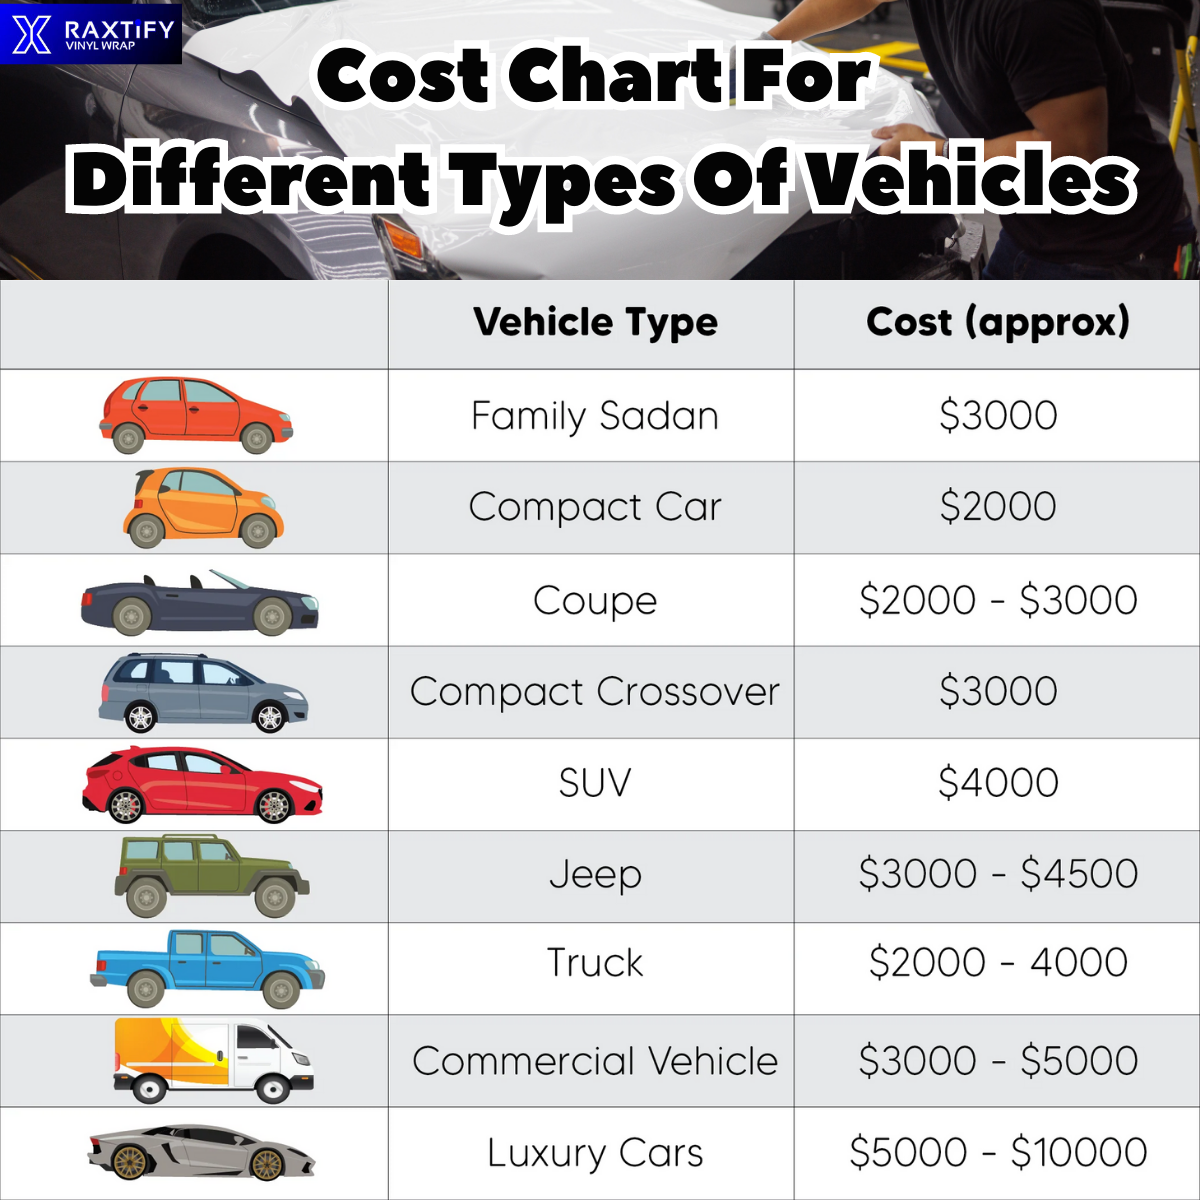 Vinyl Wrap Cost Chart For Different Types Of Vehicles